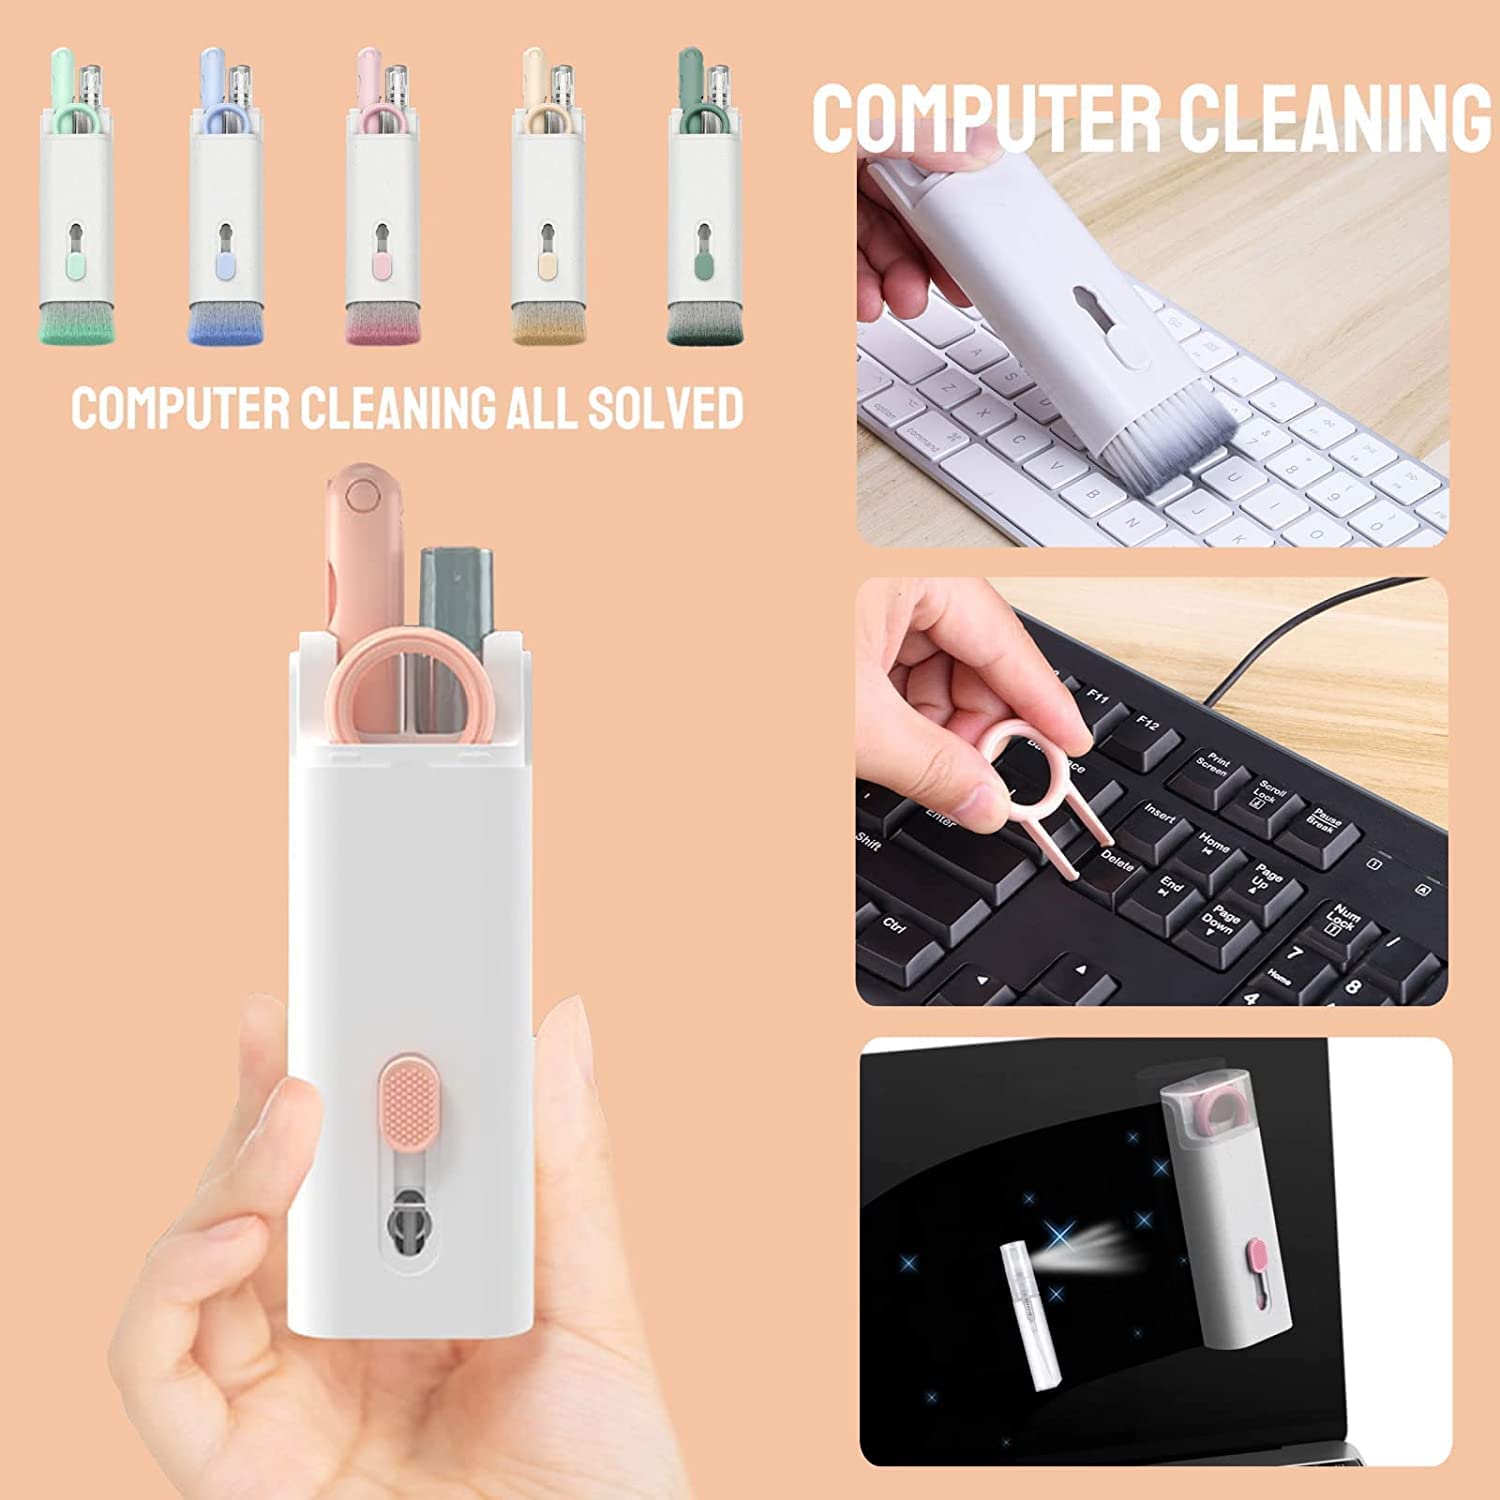 6462 7 in 1 Electronic Cleaner kit, Cleaning Kit for Monitor Keyboard Airpods, Screen Dust Brush Including Soft Sweep, Swipe, Airpod Cleaner Pen, Key Puller and Spray Bottle